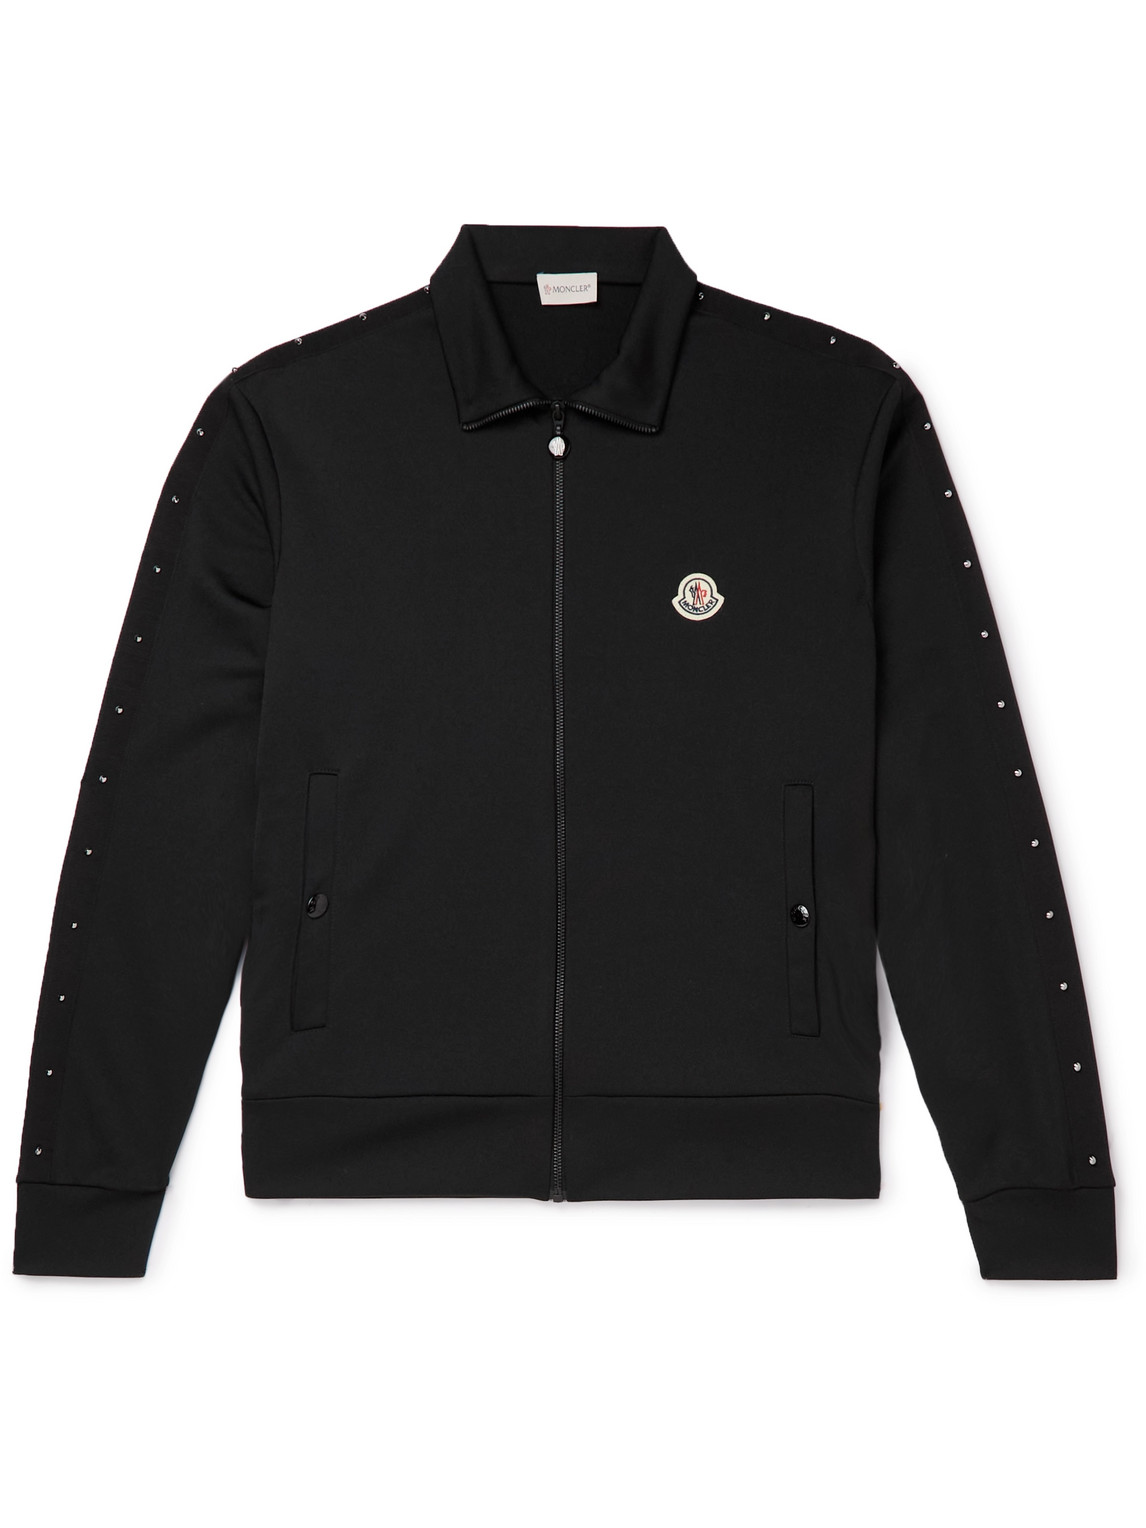 MONCLER Logo-Embroidered Grosgrain-Trimmed Cotton-Jersey Hoodie for Men